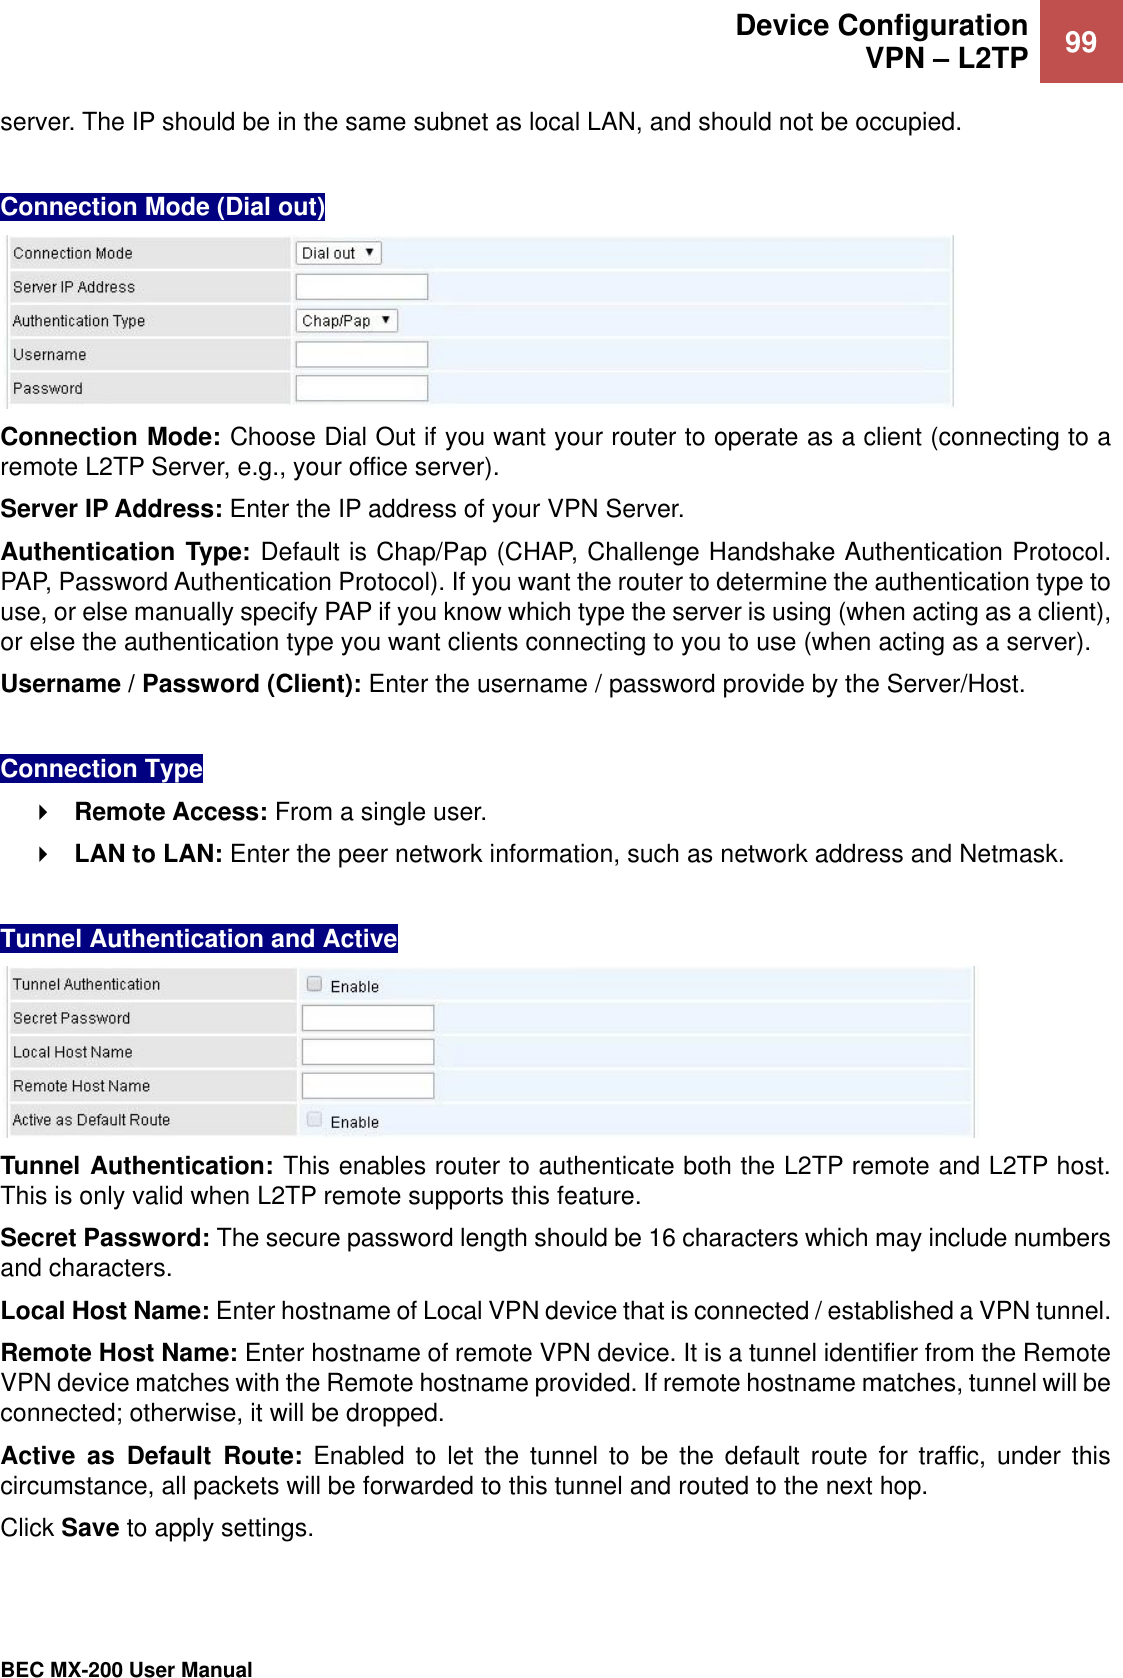  Device Configuration VPN – L2TP 99   BEC MX-200 User Manual  server. The IP should be in the same subnet as local LAN, and should not be occupied.   Connection Mode (Dial out)  Connection Mode: Choose Dial Out if you want your router to operate as a client (connecting to a remote L2TP Server, e.g., your office server). Server IP Address: Enter the IP address of your VPN Server.  Authentication Type: Default is Chap/Pap (CHAP, Challenge Handshake Authentication Protocol. PAP, Password Authentication Protocol). If you want the router to determine the authentication type to use, or else manually specify PAP if you know which type the server is using (when acting as a client), or else the authentication type you want clients connecting to you to use (when acting as a server).  Username / Password (Client): Enter the username / password provide by the Server/Host.   Connection Type  Remote Access: From a single user.  LAN to LAN: Enter the peer network information, such as network address and Netmask.  Tunnel Authentication and Active   Tunnel Authentication: This enables router to authenticate both the L2TP remote and L2TP host. This is only valid when L2TP remote supports this feature. Secret Password: The secure password length should be 16 characters which may include numbers and characters. Local Host Name: Enter hostname of Local VPN device that is connected / established a VPN tunnel.  Remote Host Name: Enter hostname of remote VPN device. It is a tunnel identifier from the Remote VPN device matches with the Remote hostname provided. If remote hostname matches, tunnel will be connected; otherwise, it will be dropped. Active  as  Default  Route:  Enabled  to  let  the  tunnel  to  be  the  default  route  for  traffic, under  this circumstance, all packets will be forwarded to this tunnel and routed to the next hop. Click Save to apply settings.  